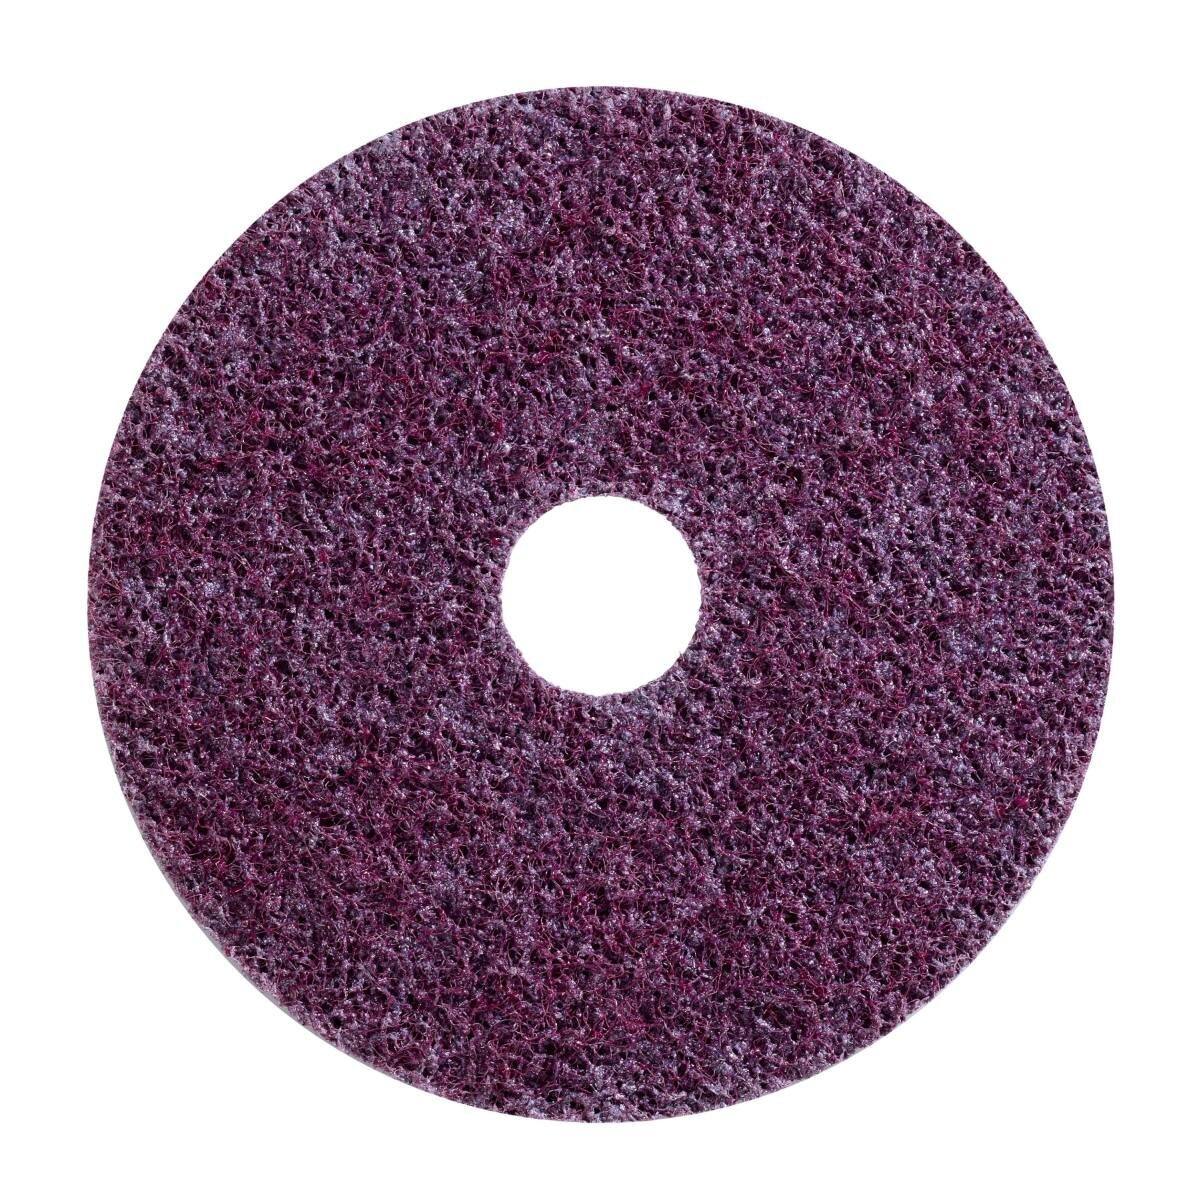 3M Scotch-Brite Non-woven disc GB-DH with centring, red-brown, 125 mm x 22 mm, coarse heavy duty